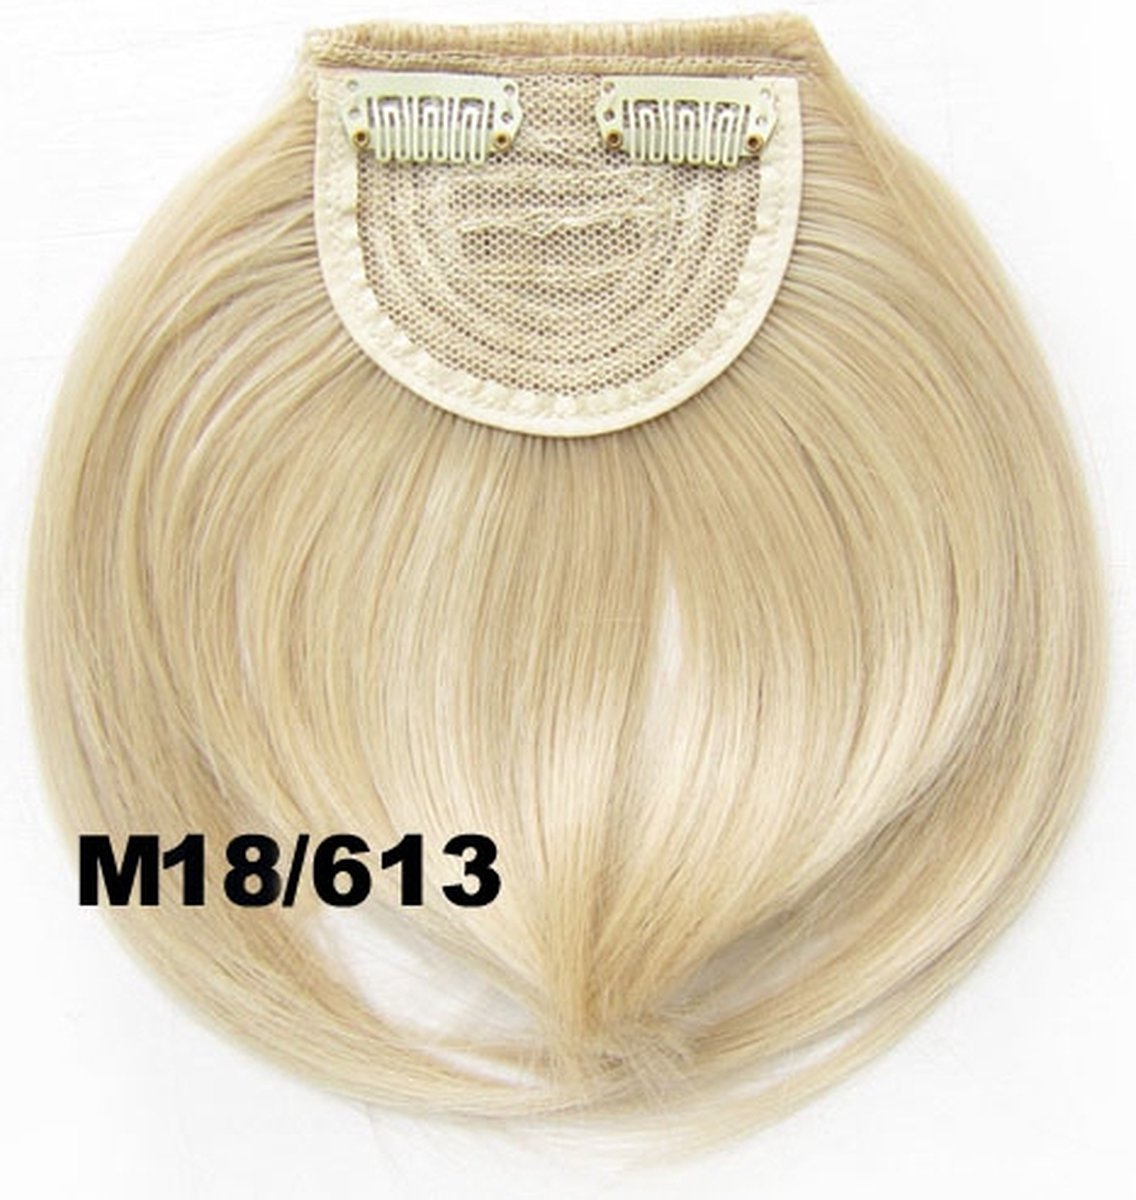 Pony hairextension clip in blond - M18/613#